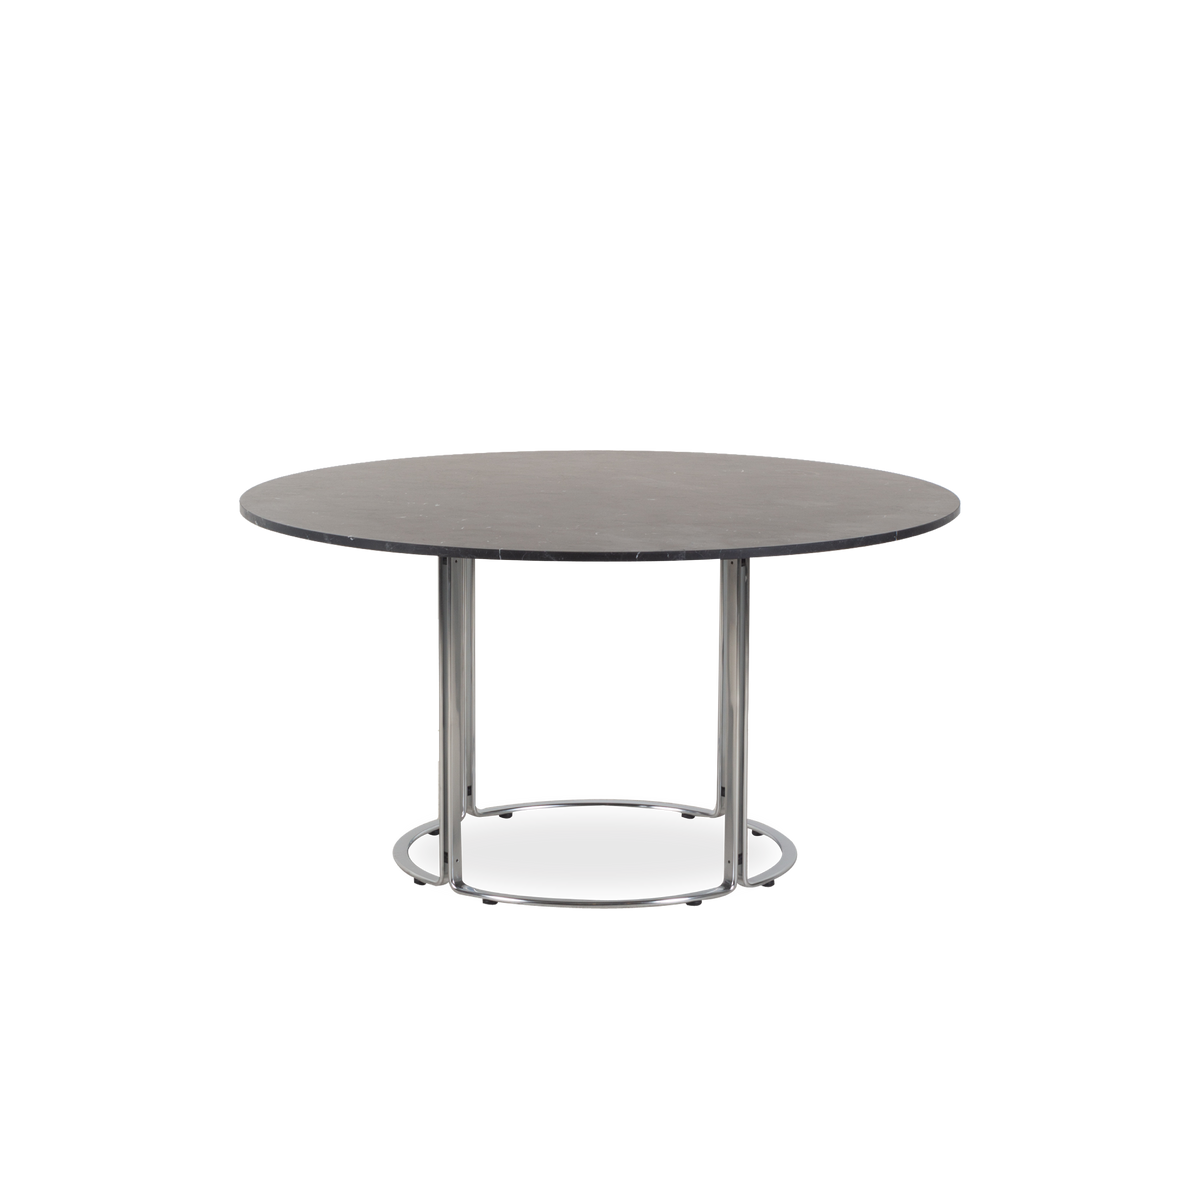 Hb 120 Dining Table